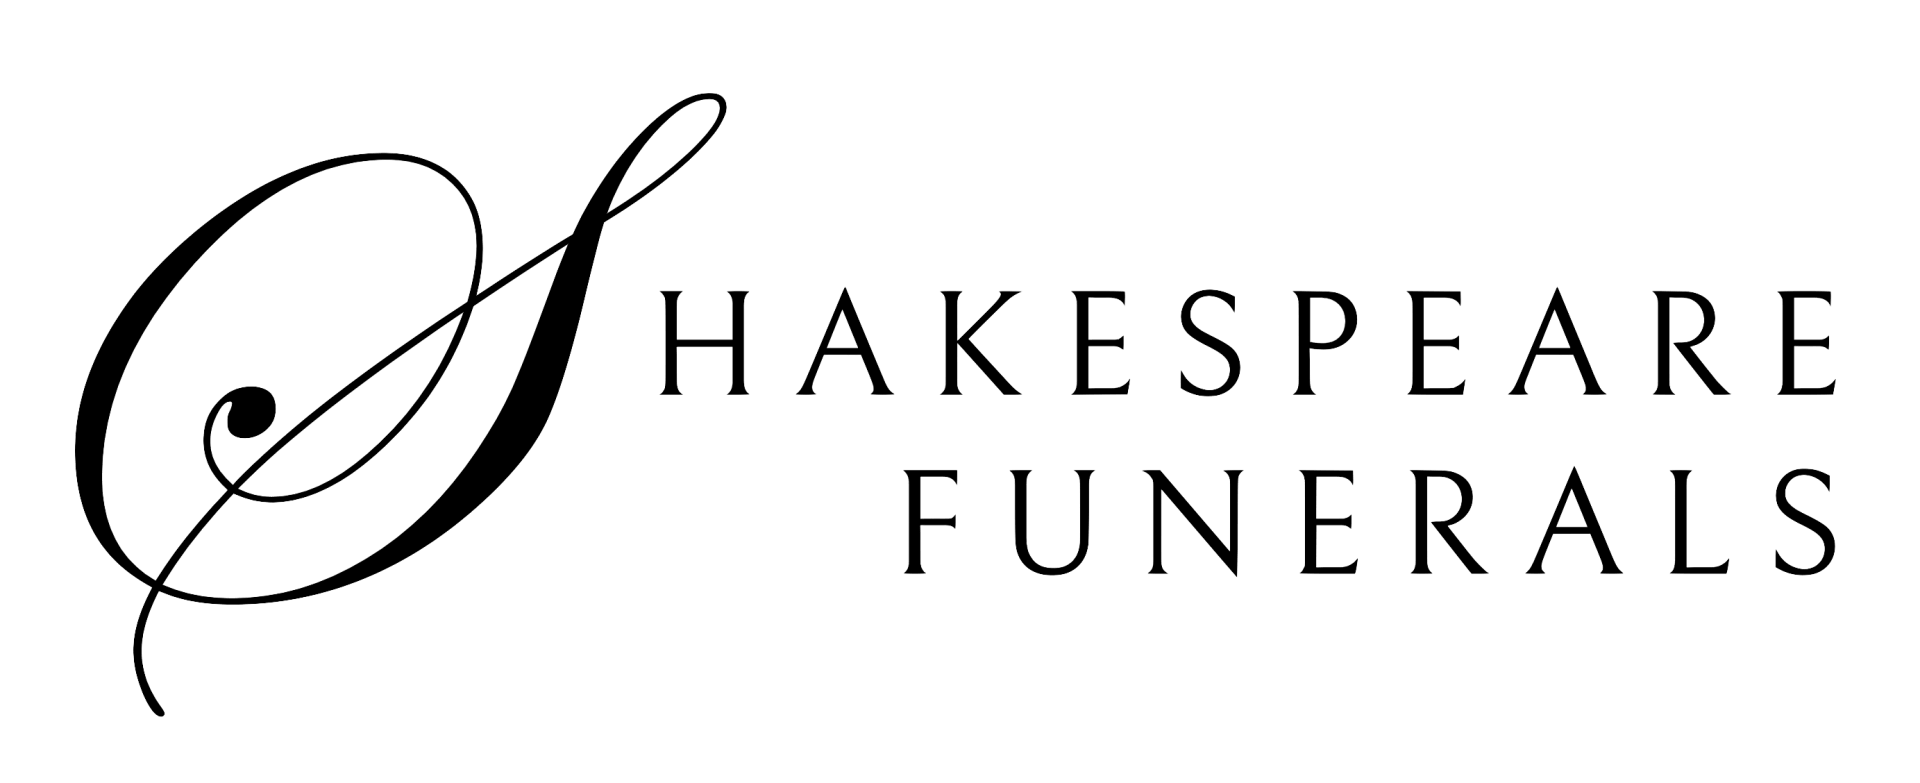 Welcome to Shakespeare Funerals—Funeral Home in Dubbo